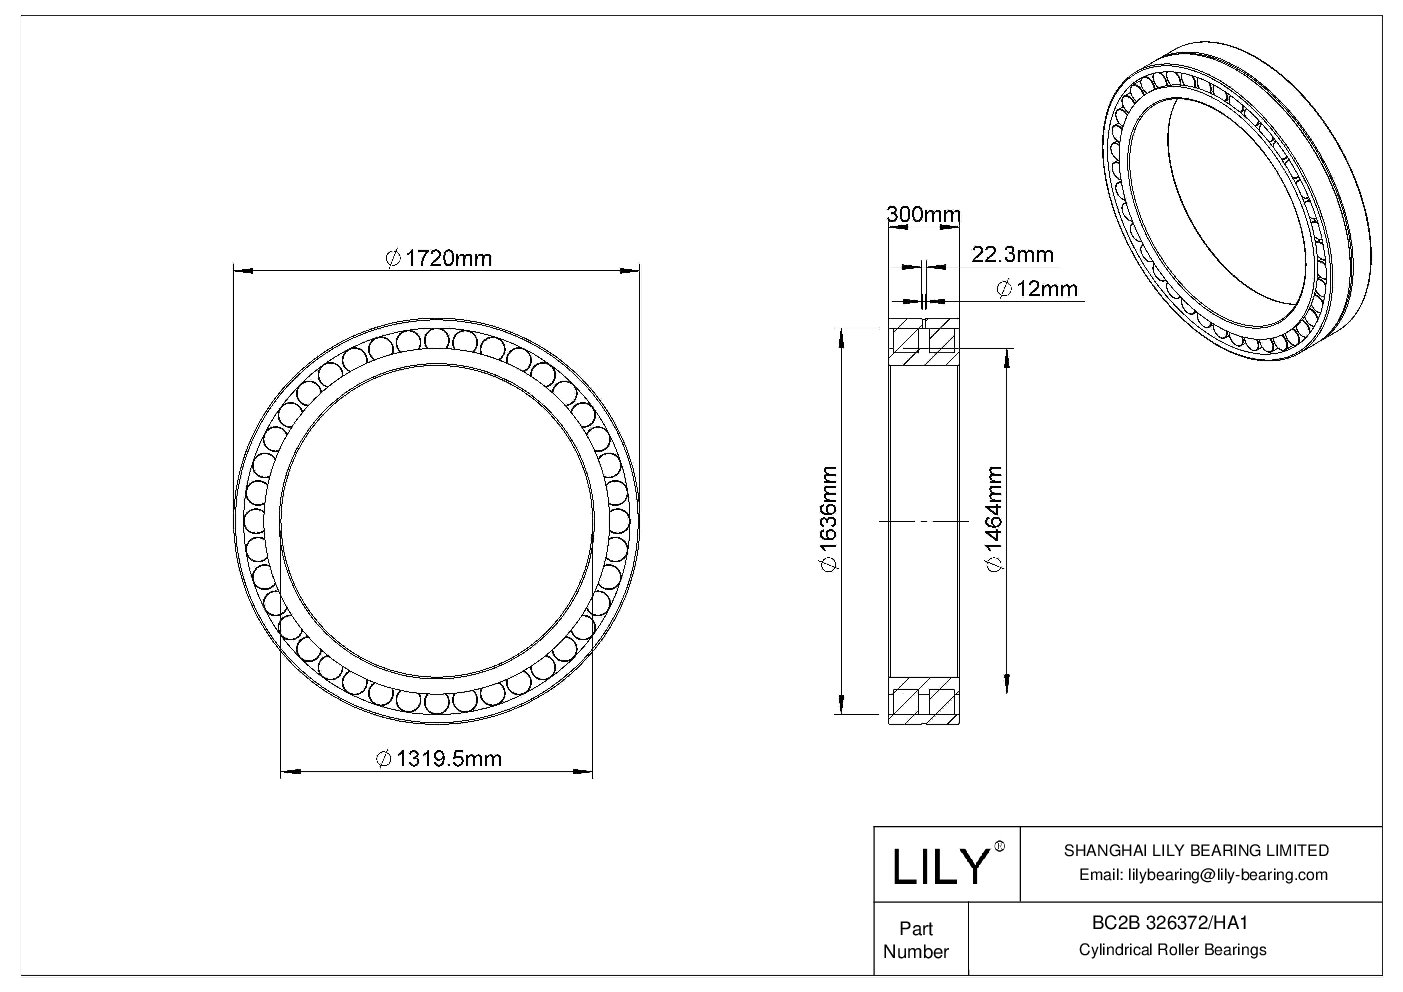 BC2B 326372/HA1 Double Row Cylindrical Roller Bearings cad drawing